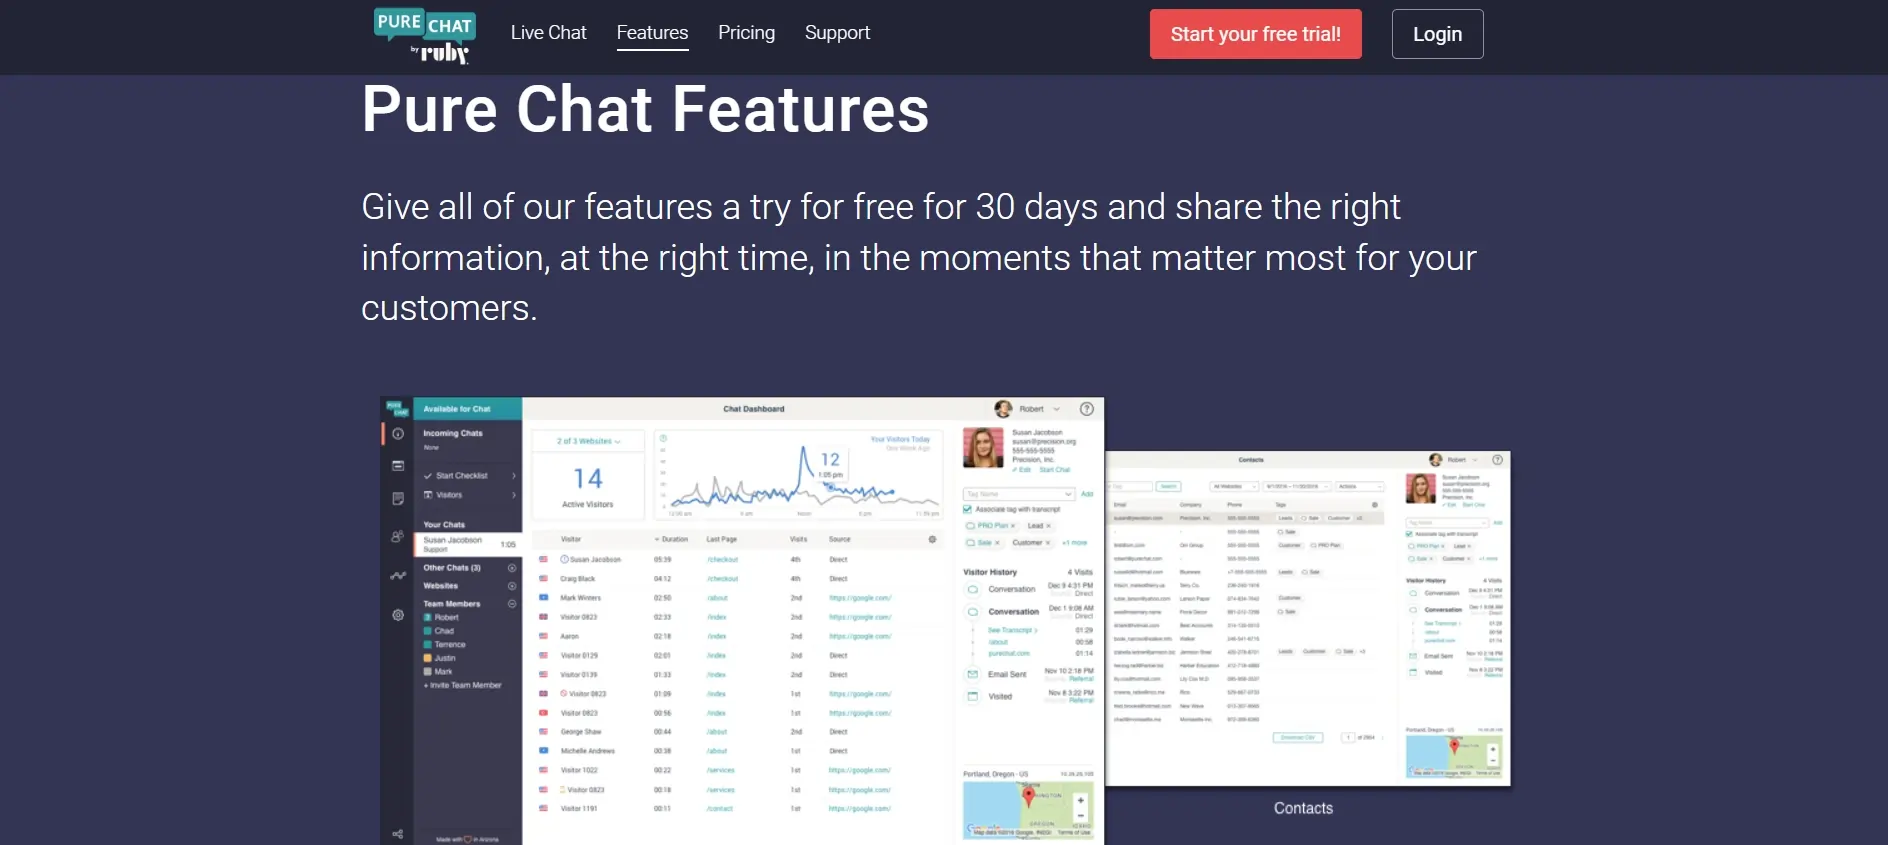 Key Features Of Pure Chat